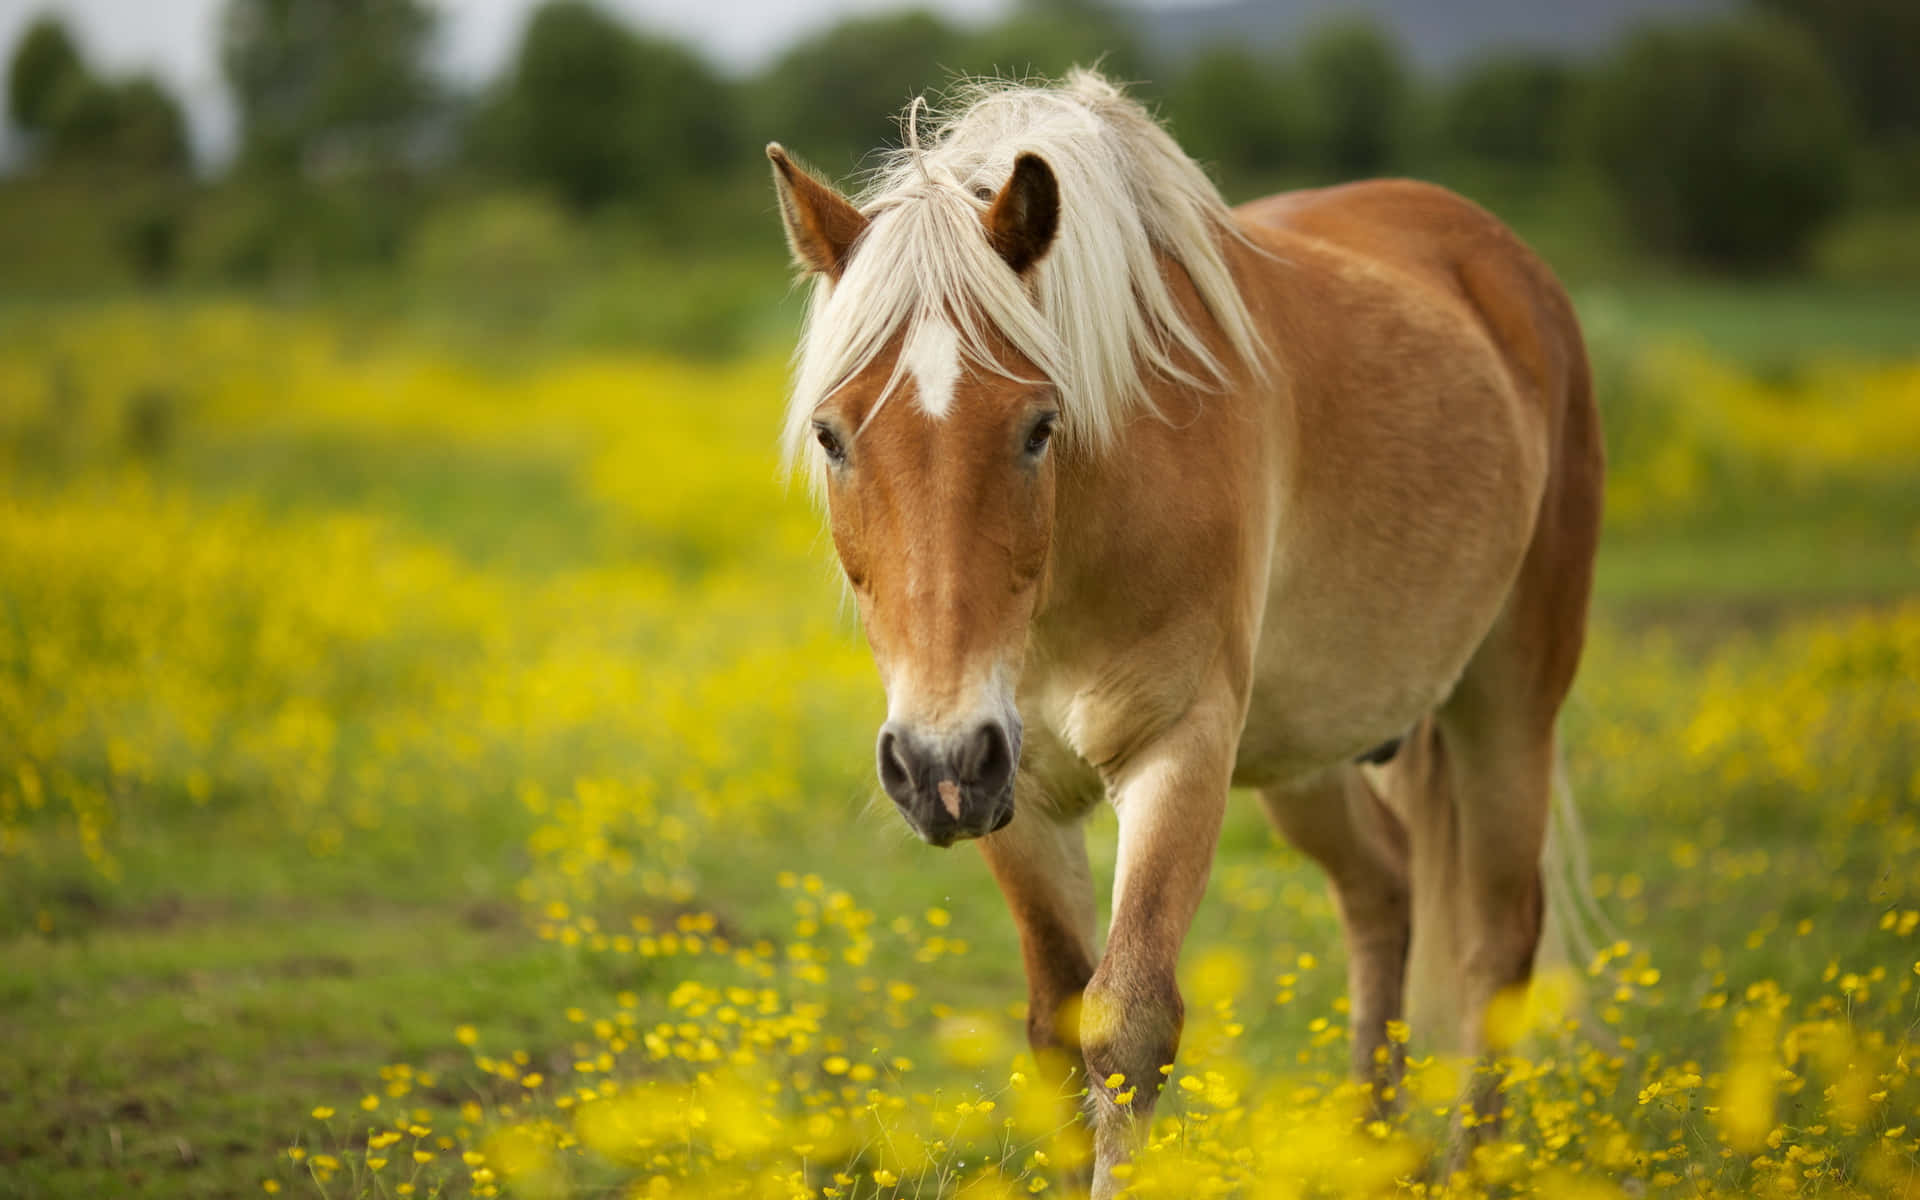 Look at this Graceful and Sweet Cute Horse!